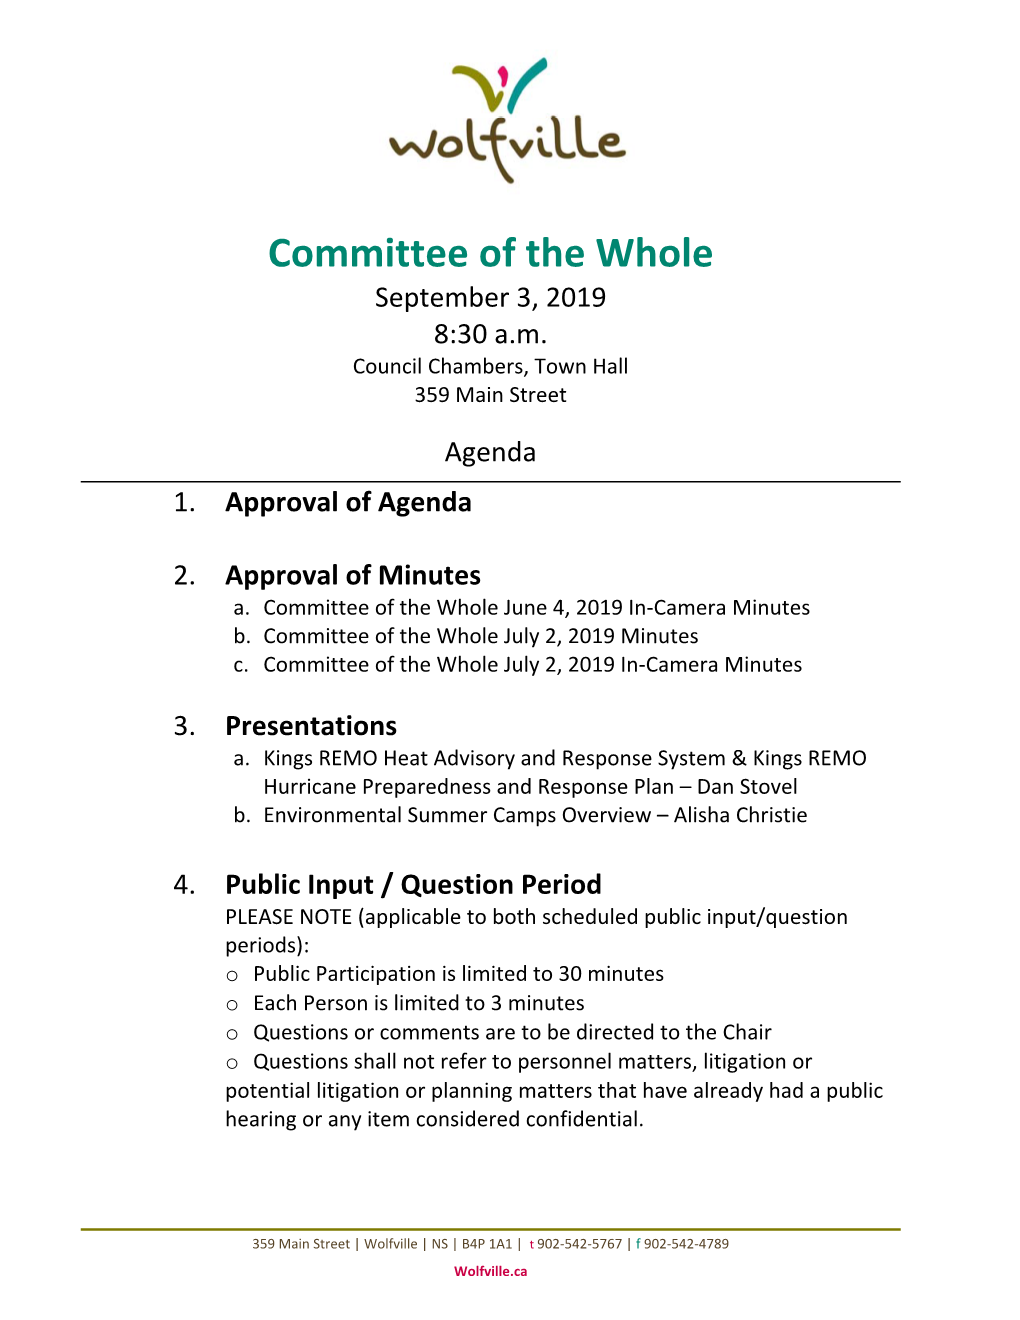 Committee of the Whole September 3, 2019 8:30 A.M